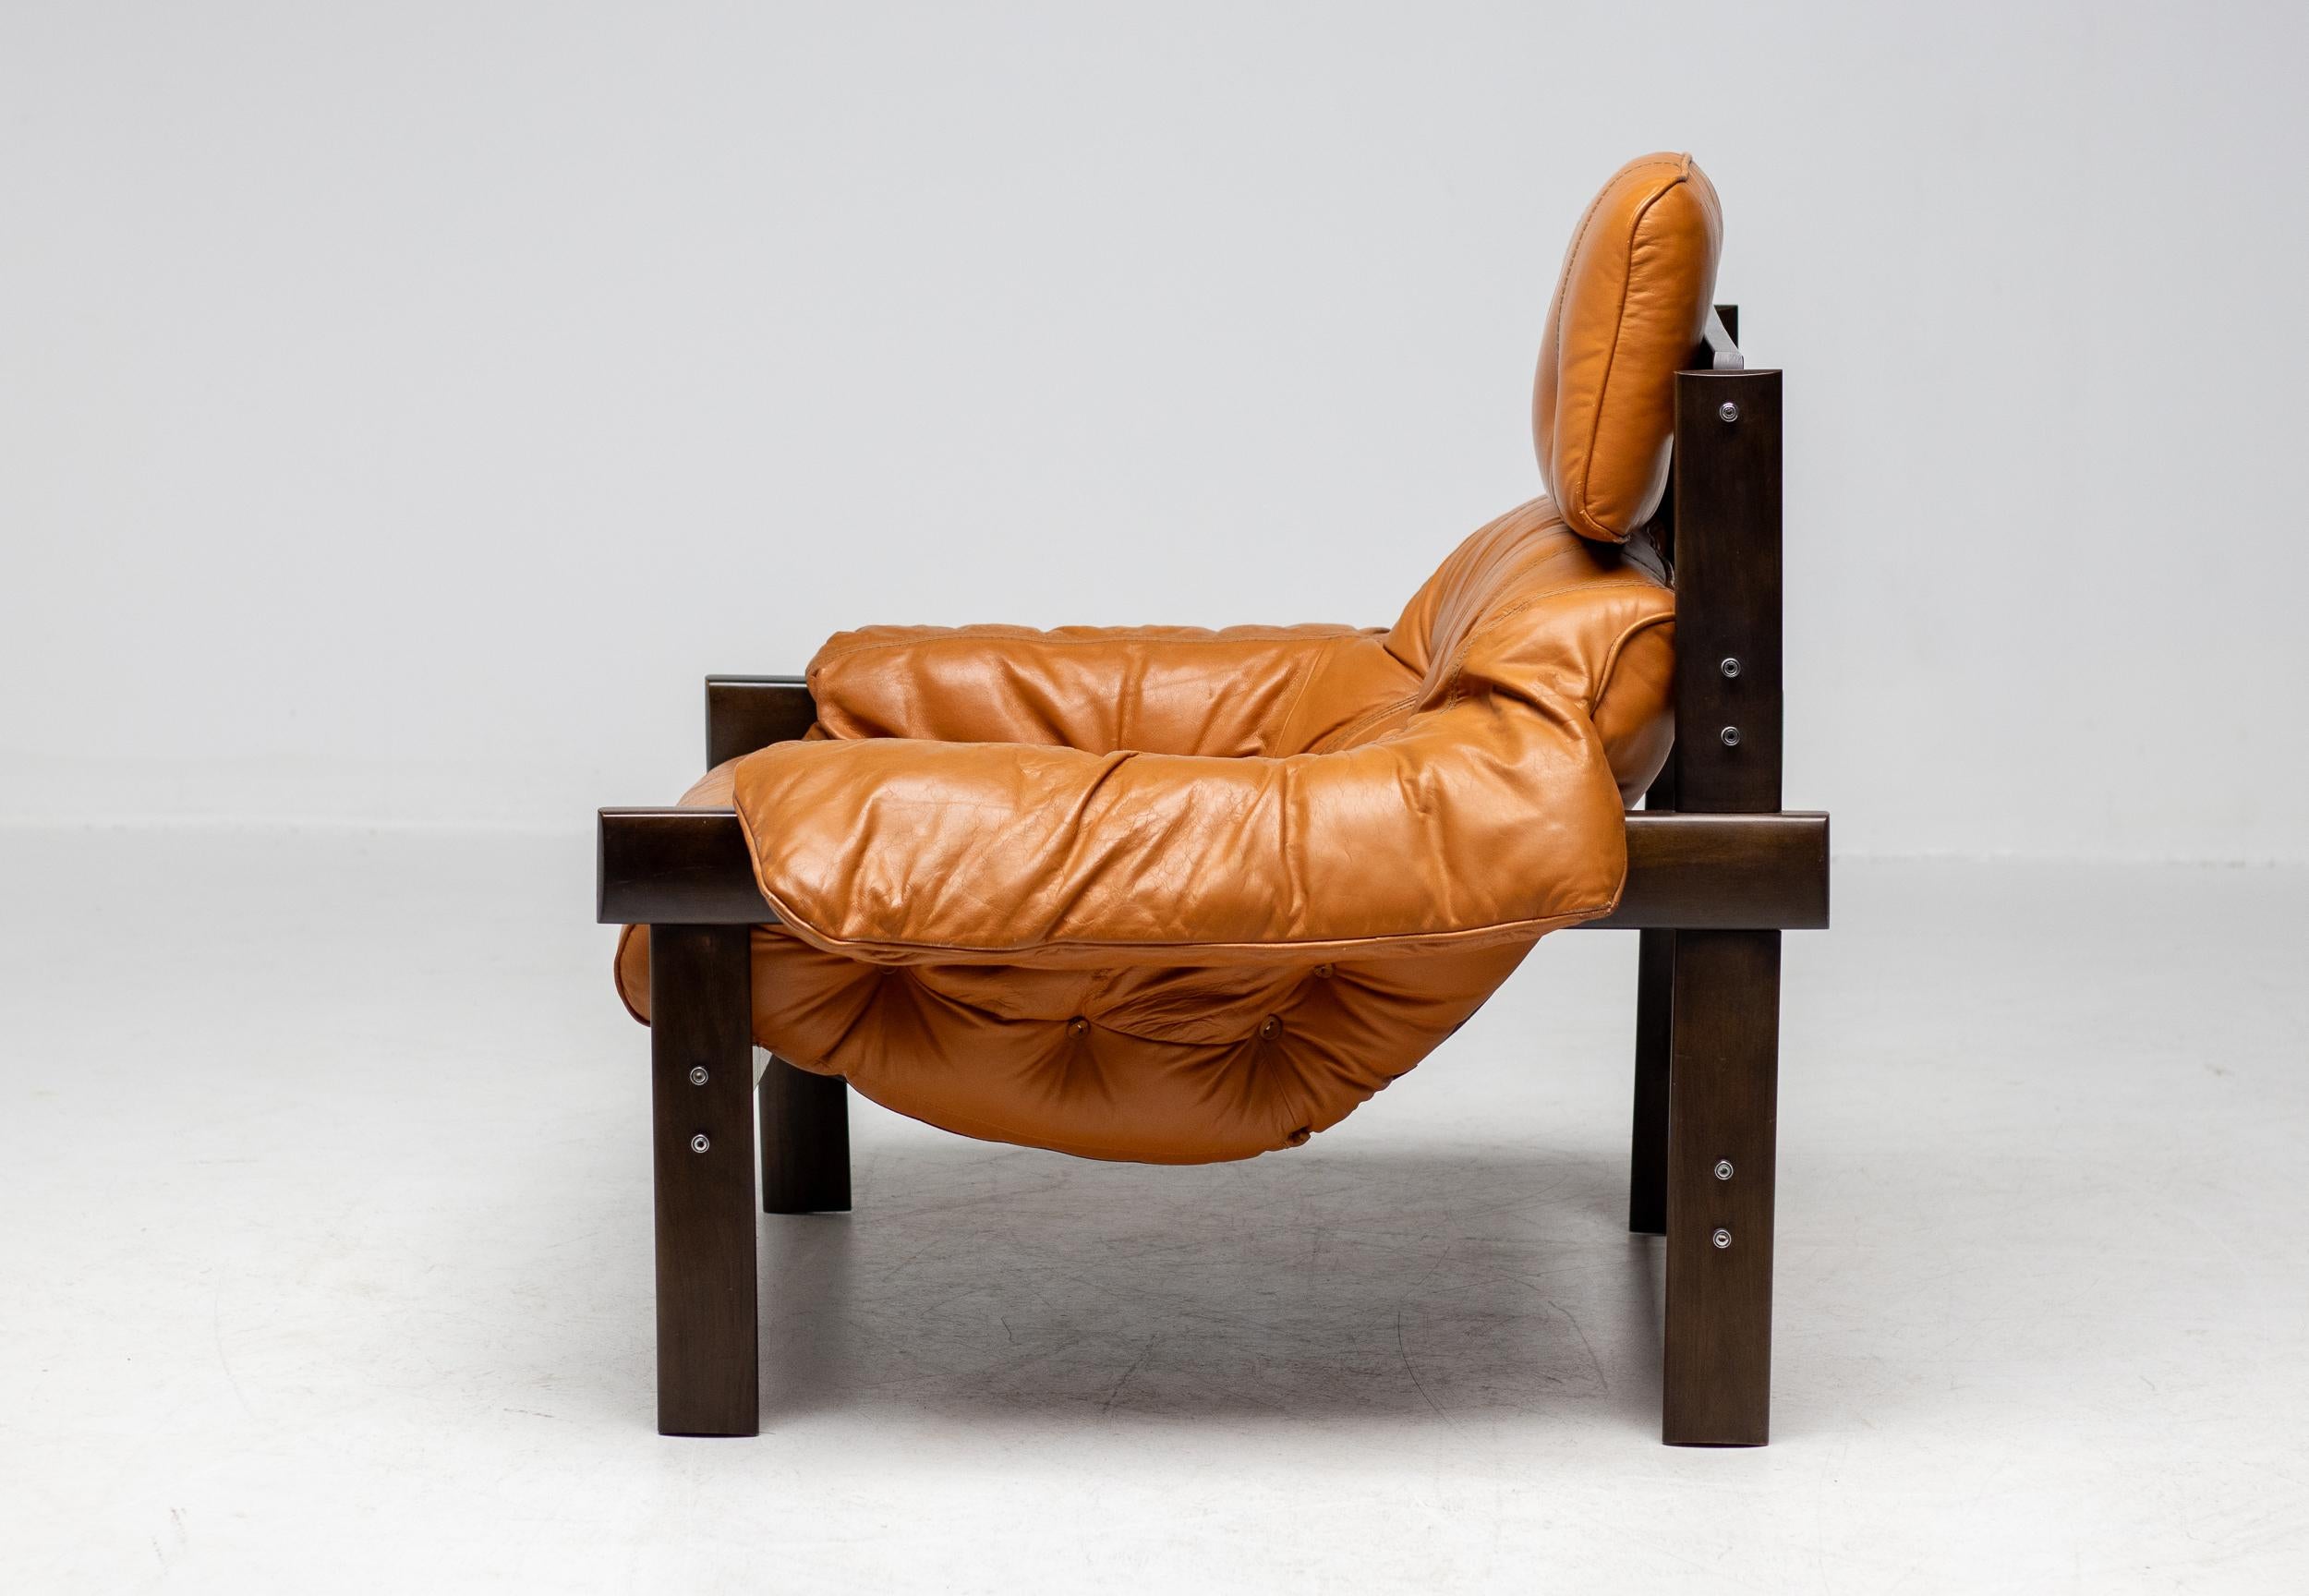 Mid-20th Century Percival Lafer MP-43 Lounge Chair Produced by Lafer MP in Brazil